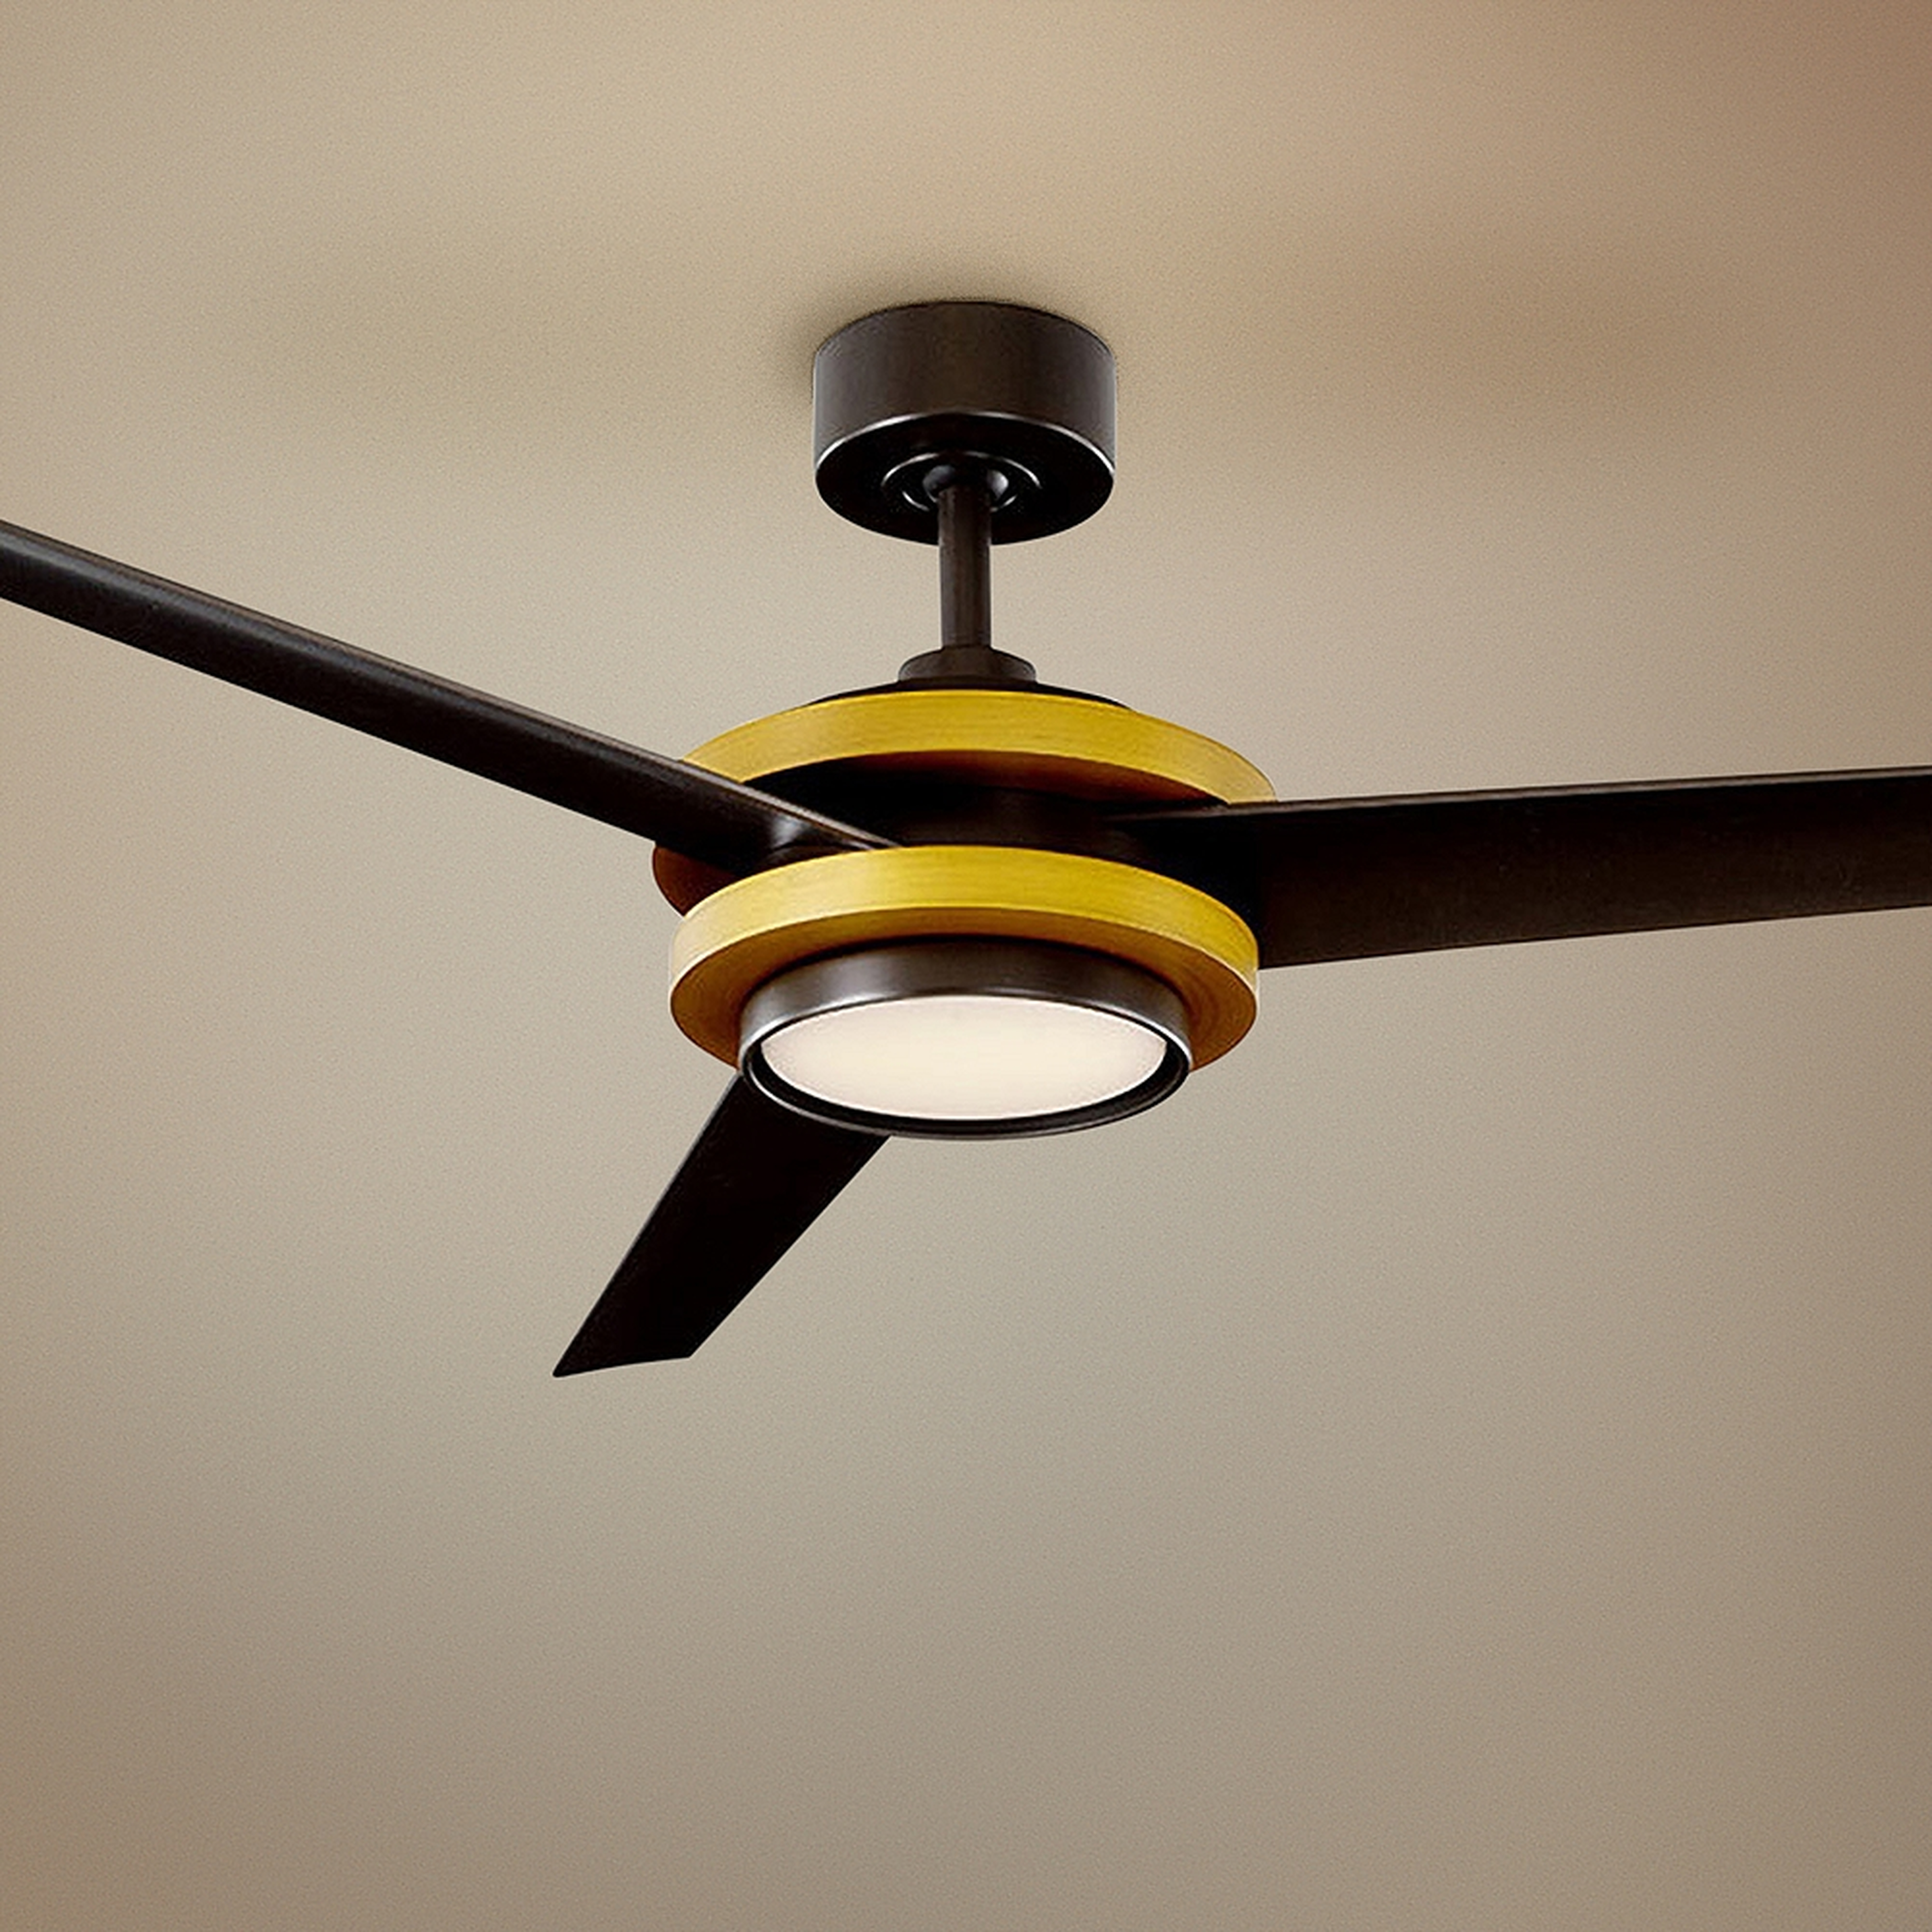 60" Modern Forms Venus Aged Brass LED Wet Rated Ceiling Fan - Style # 75K00 - Lamps Plus